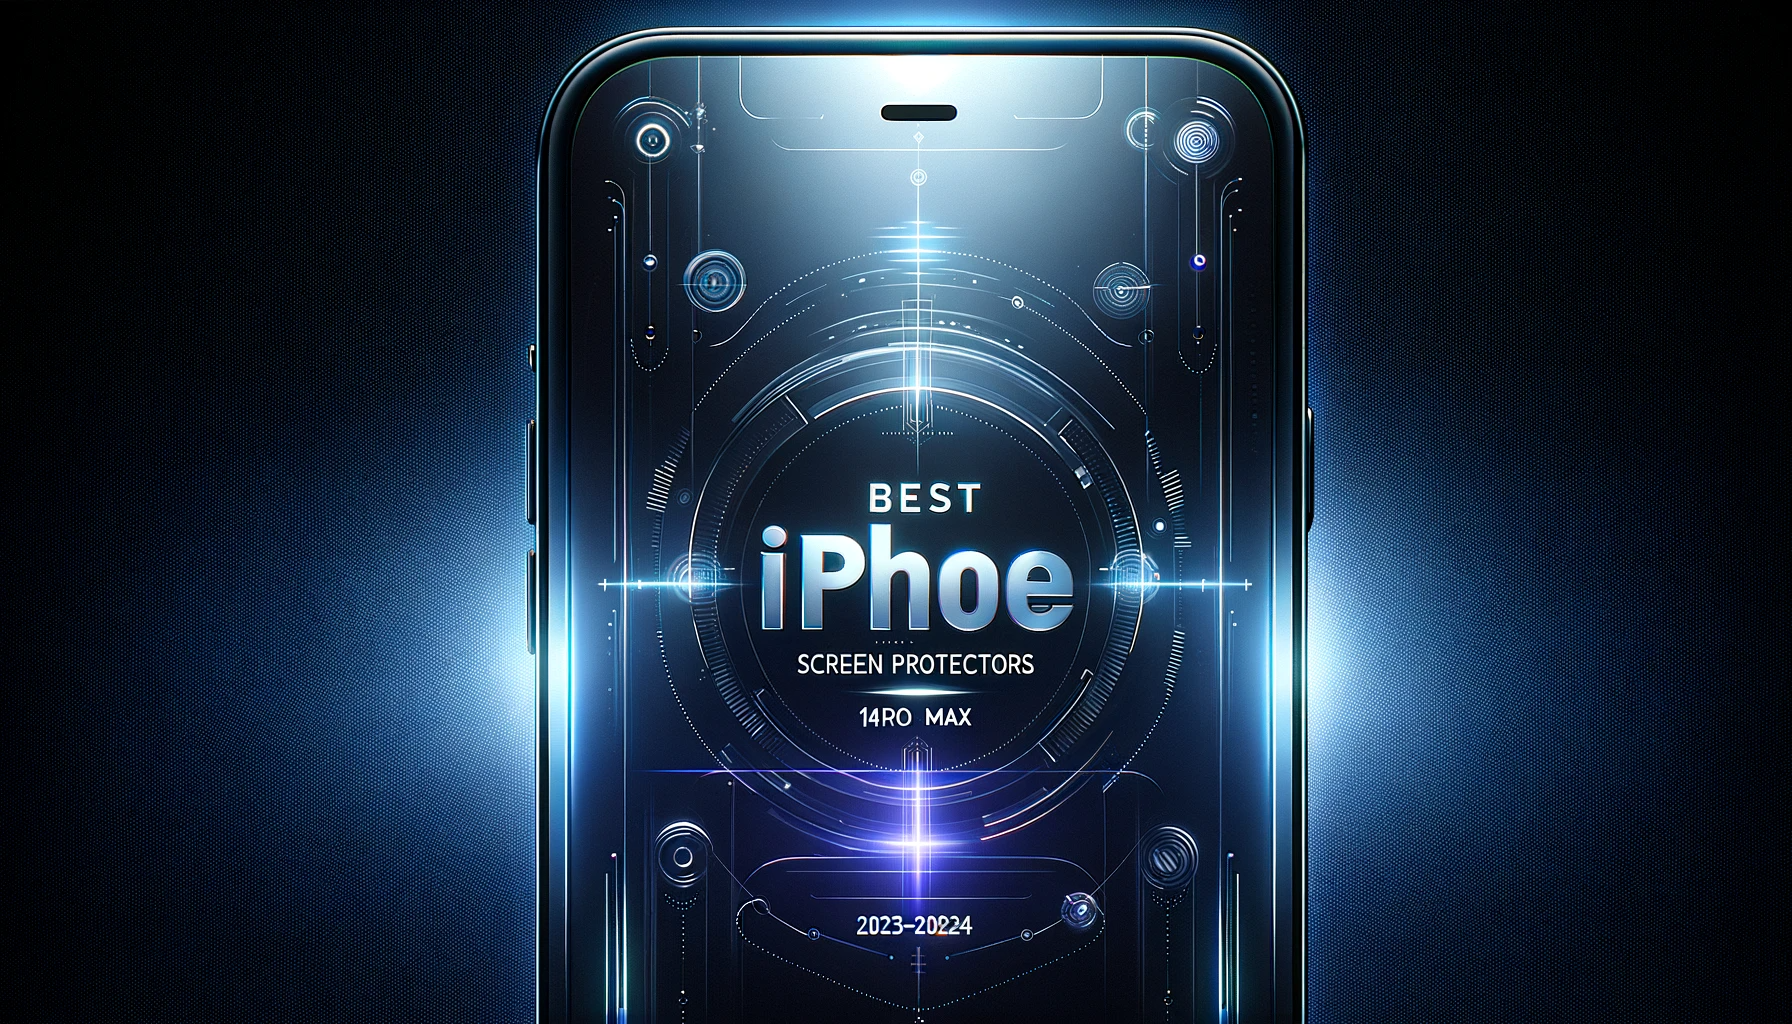 Best Iphone 14 Pro Max Screen Protector In 2023-2024